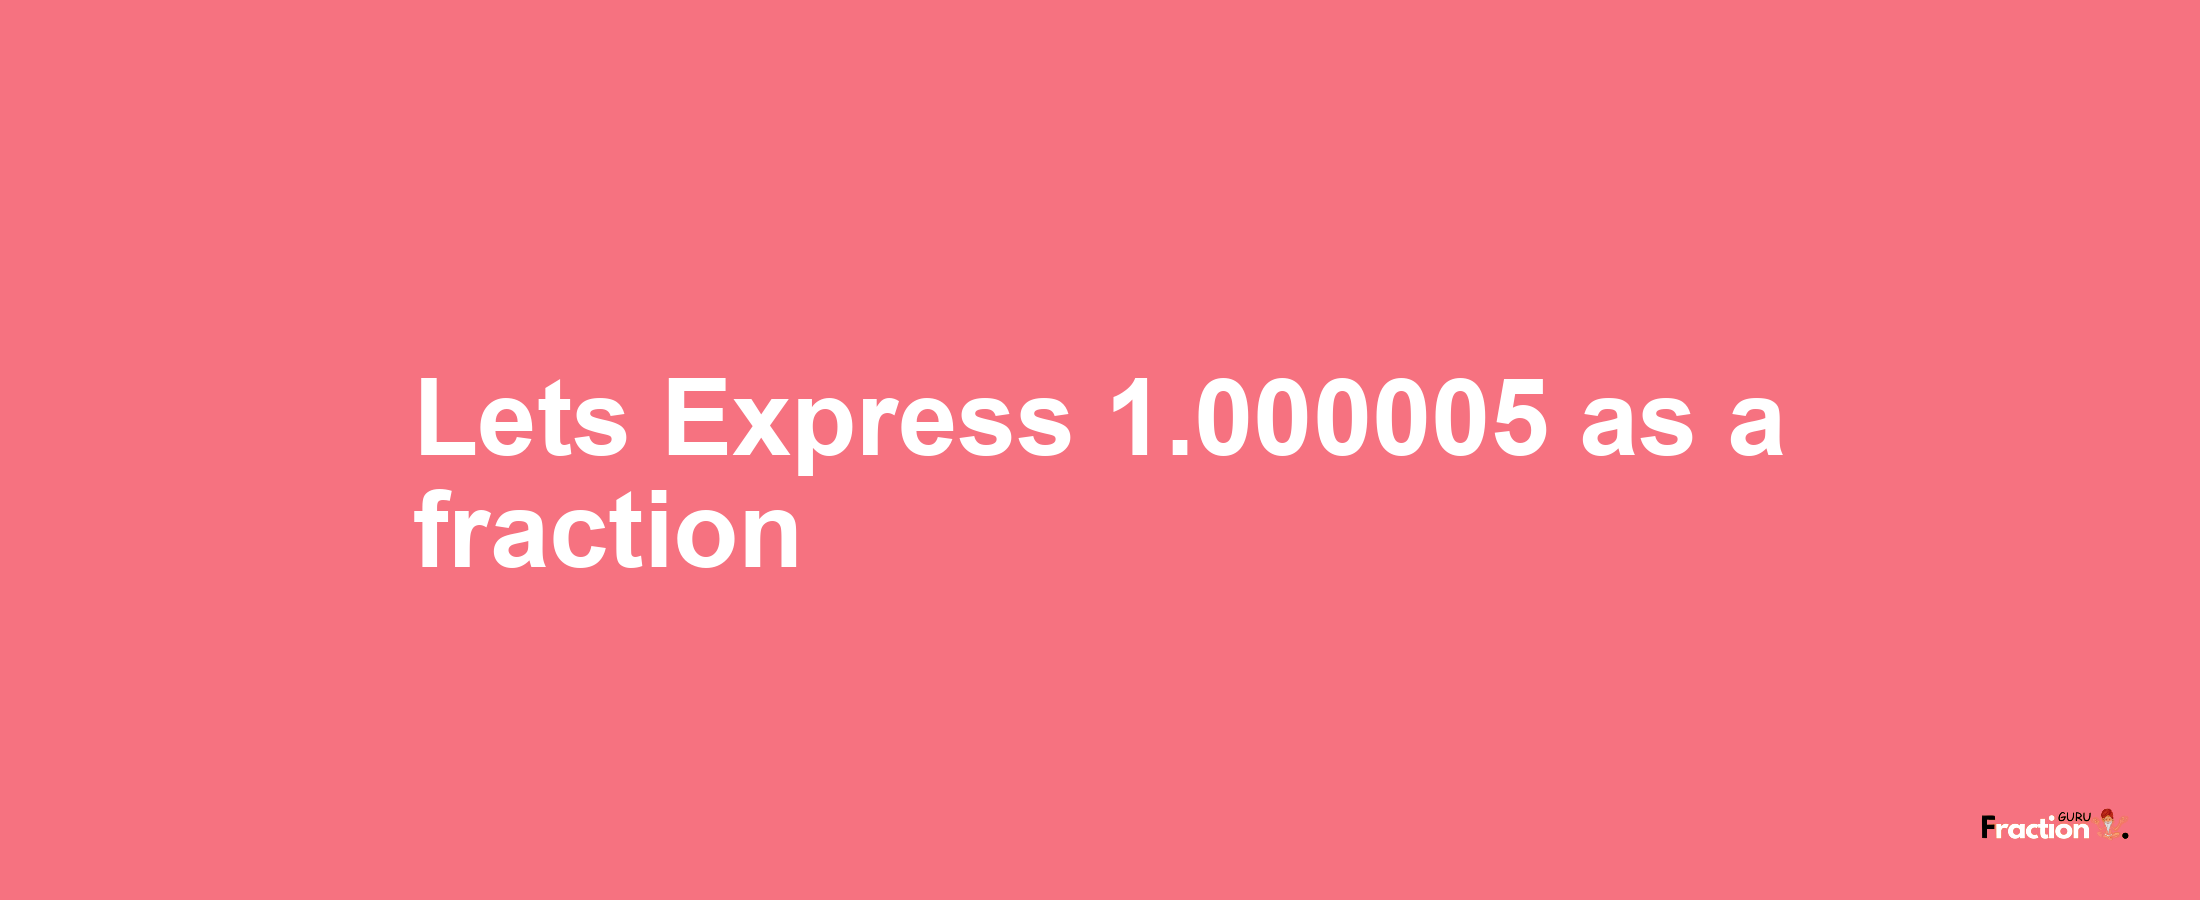 Lets Express 1.000005 as afraction